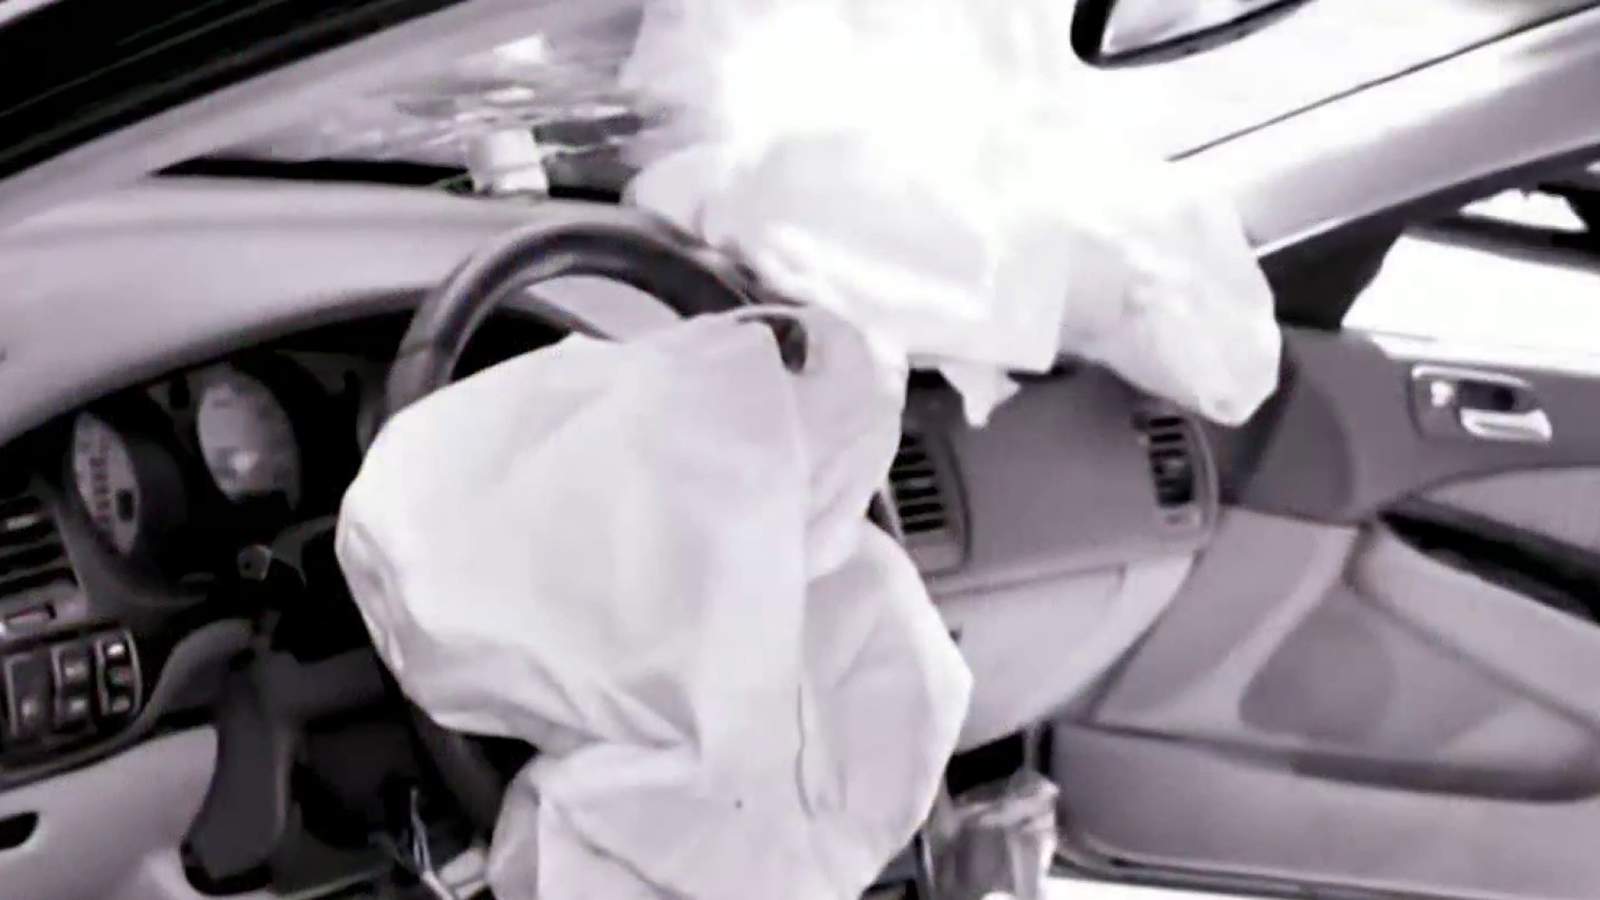 3.5 million vehicles on Florida roads have open airbag recalls